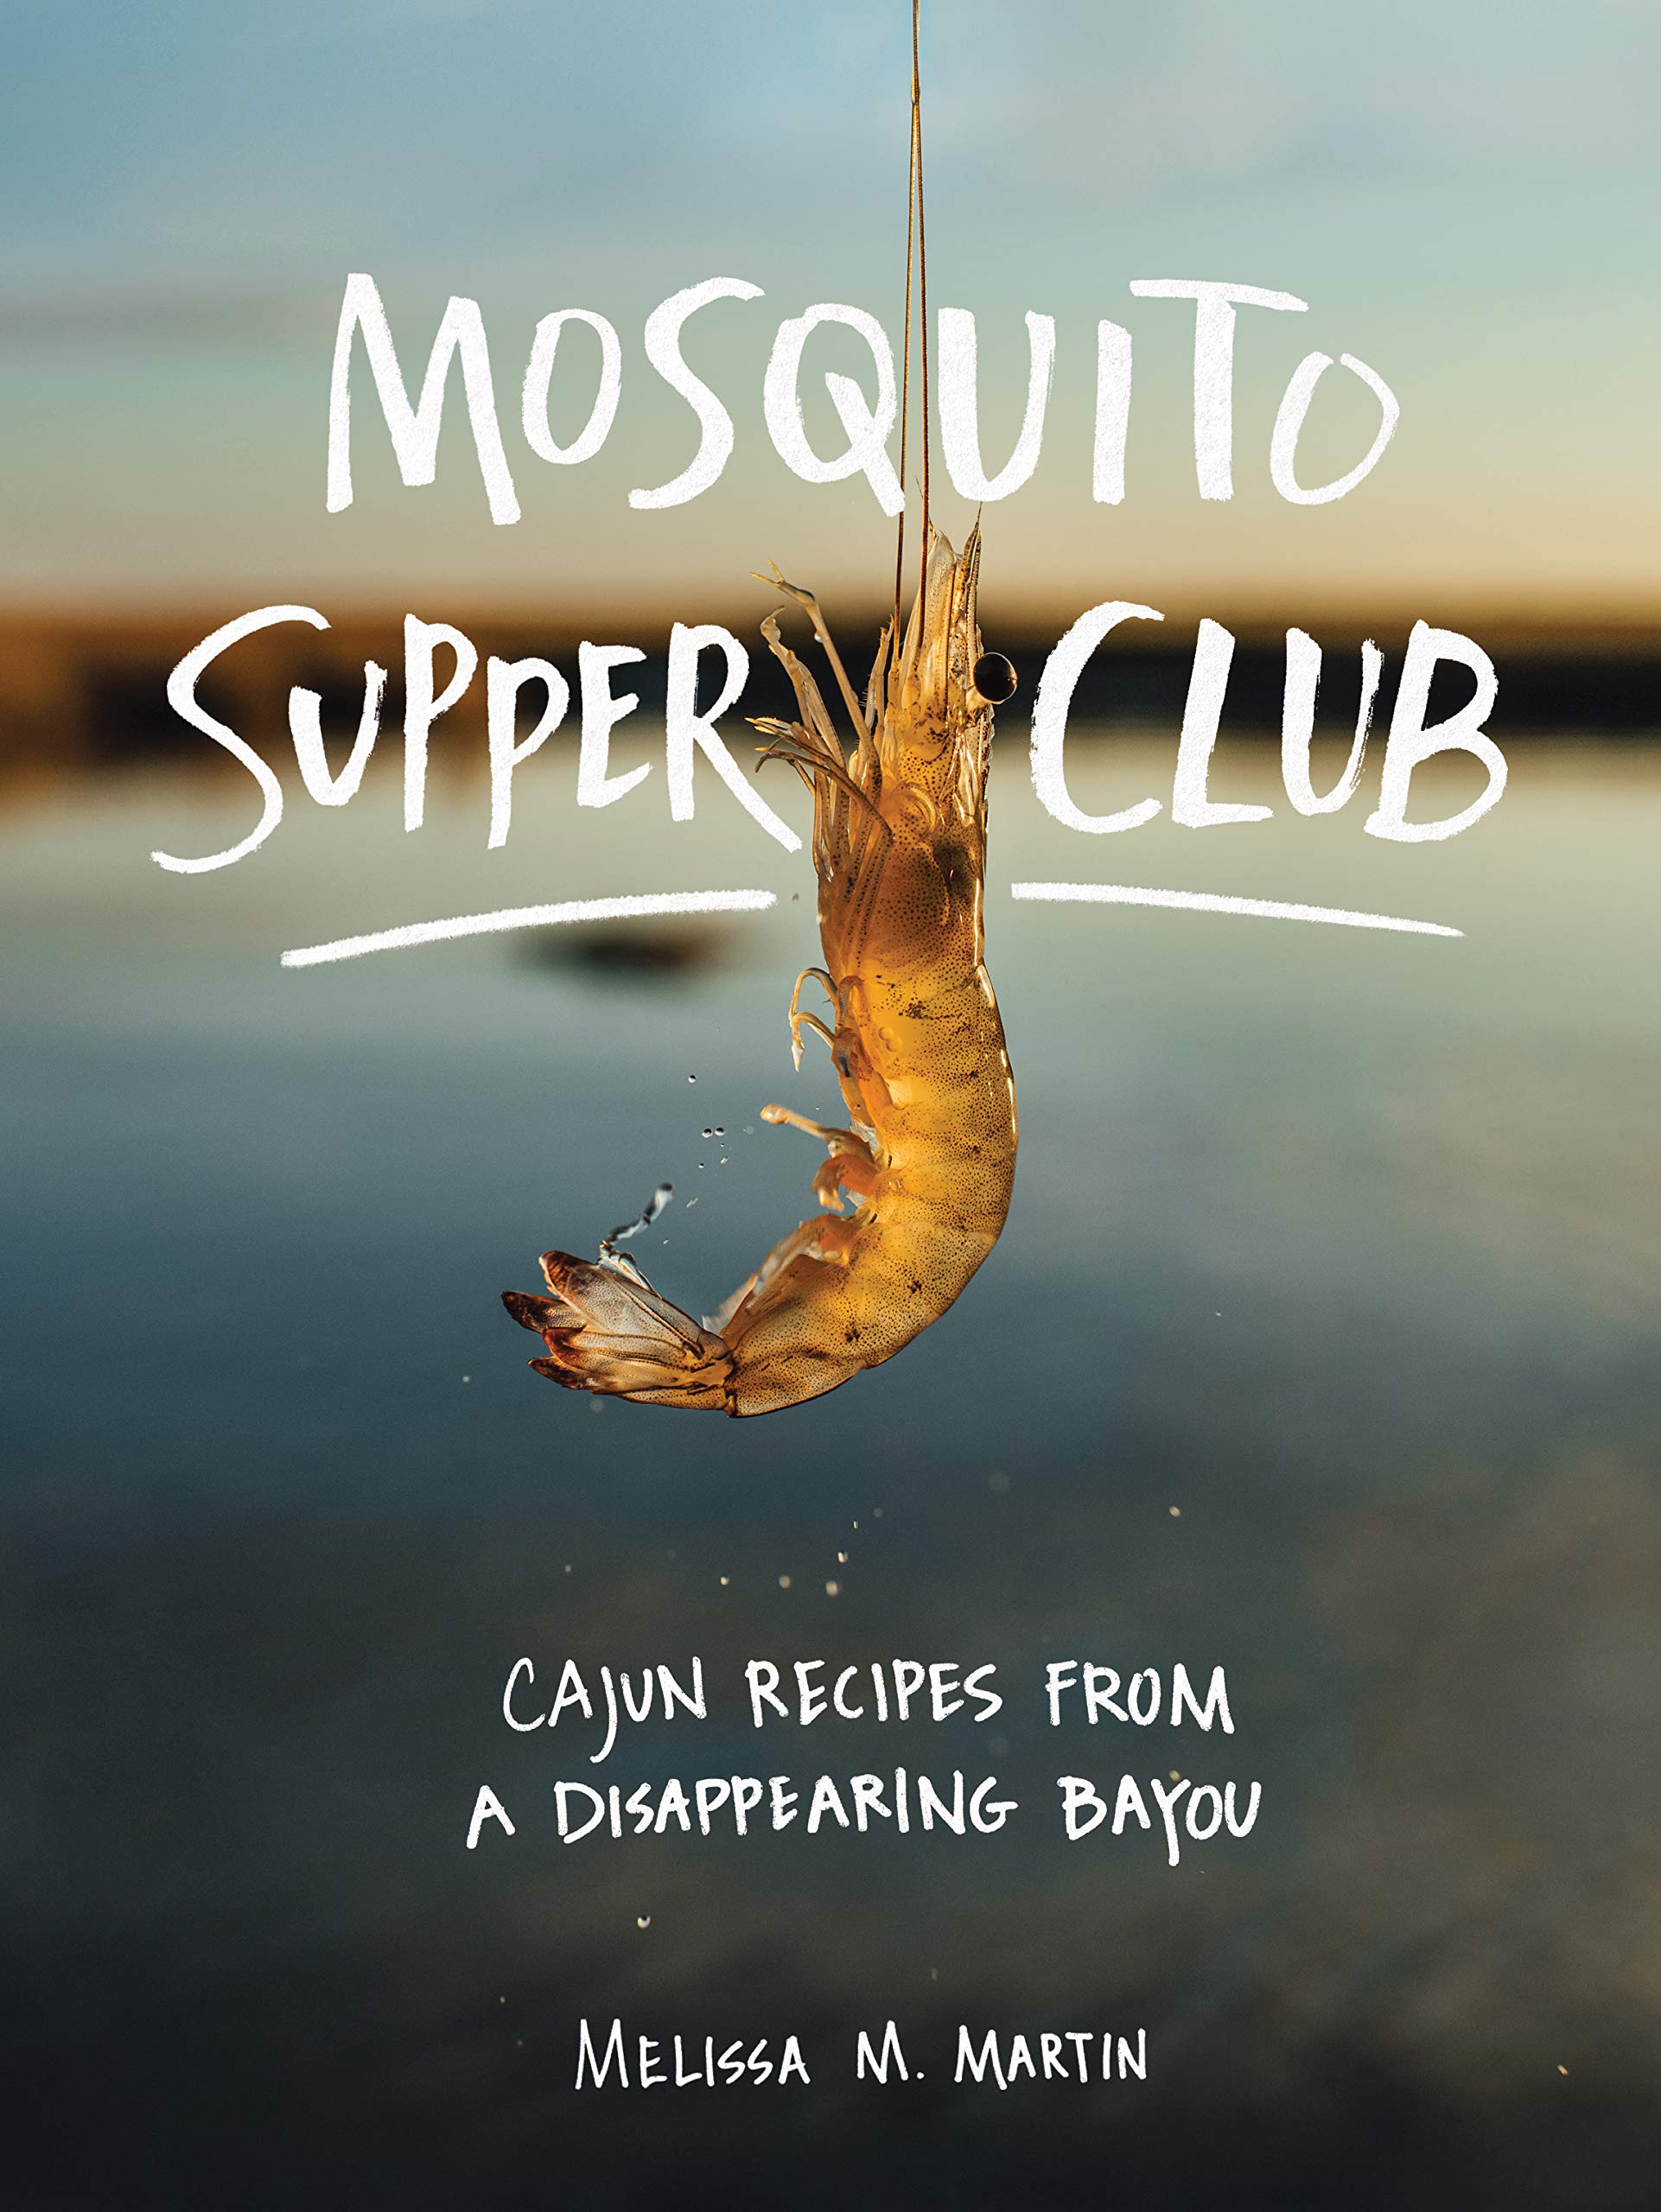 Mosquito Supper Club: Cajun Recipes from a Disappearing Bayou (Melissa Martin) *Signed*